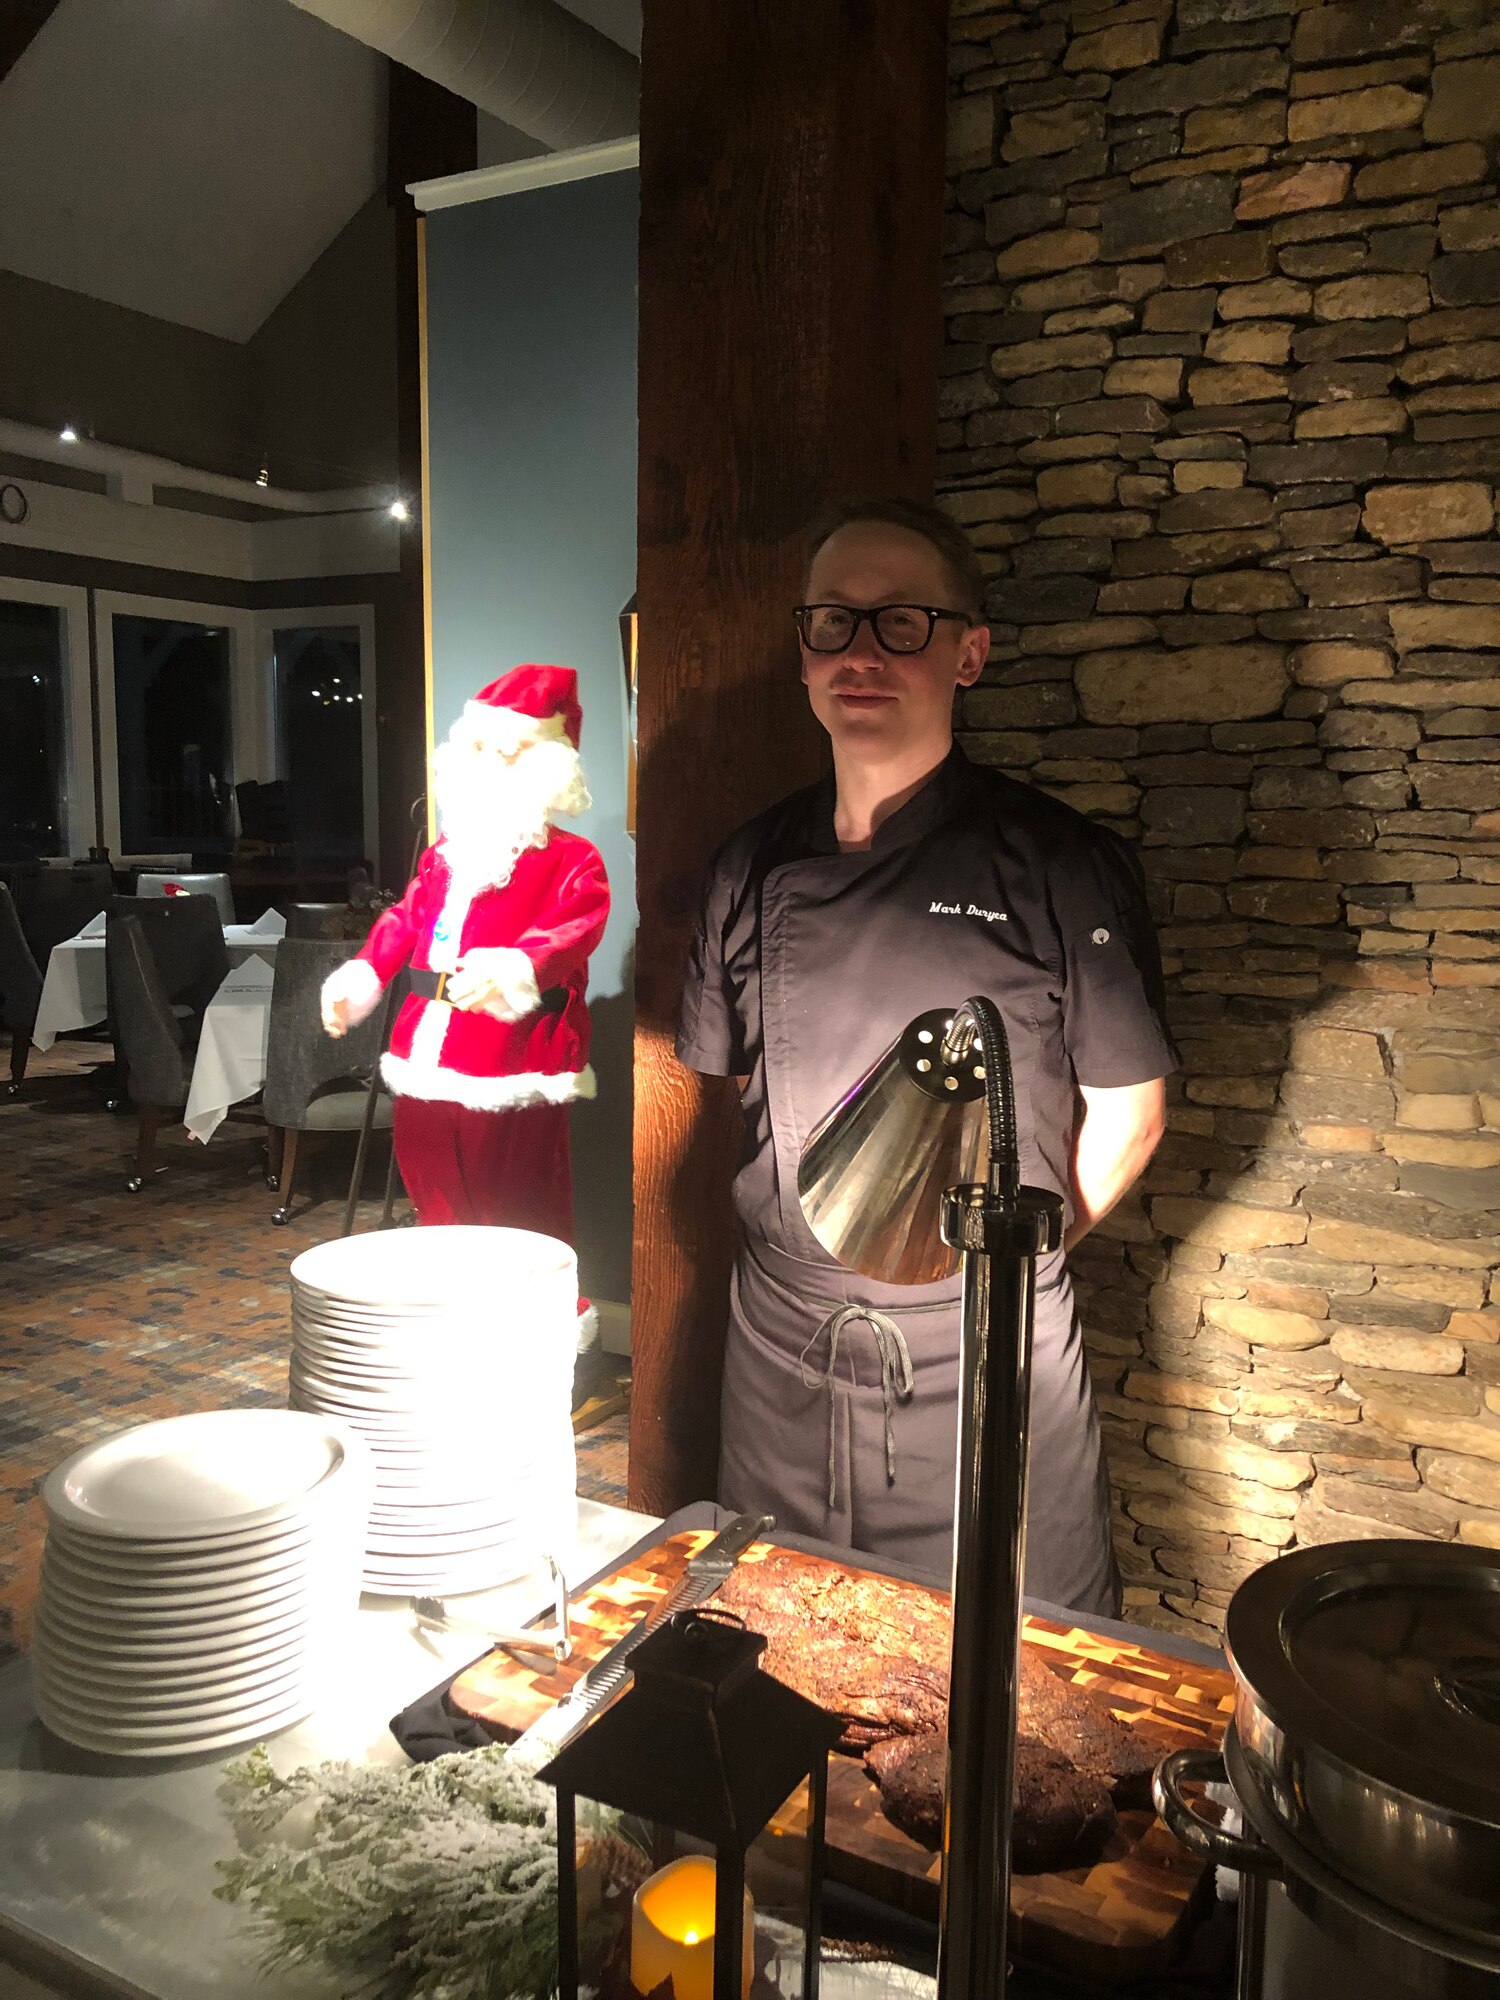 Photo of airman posing as a chef before joining